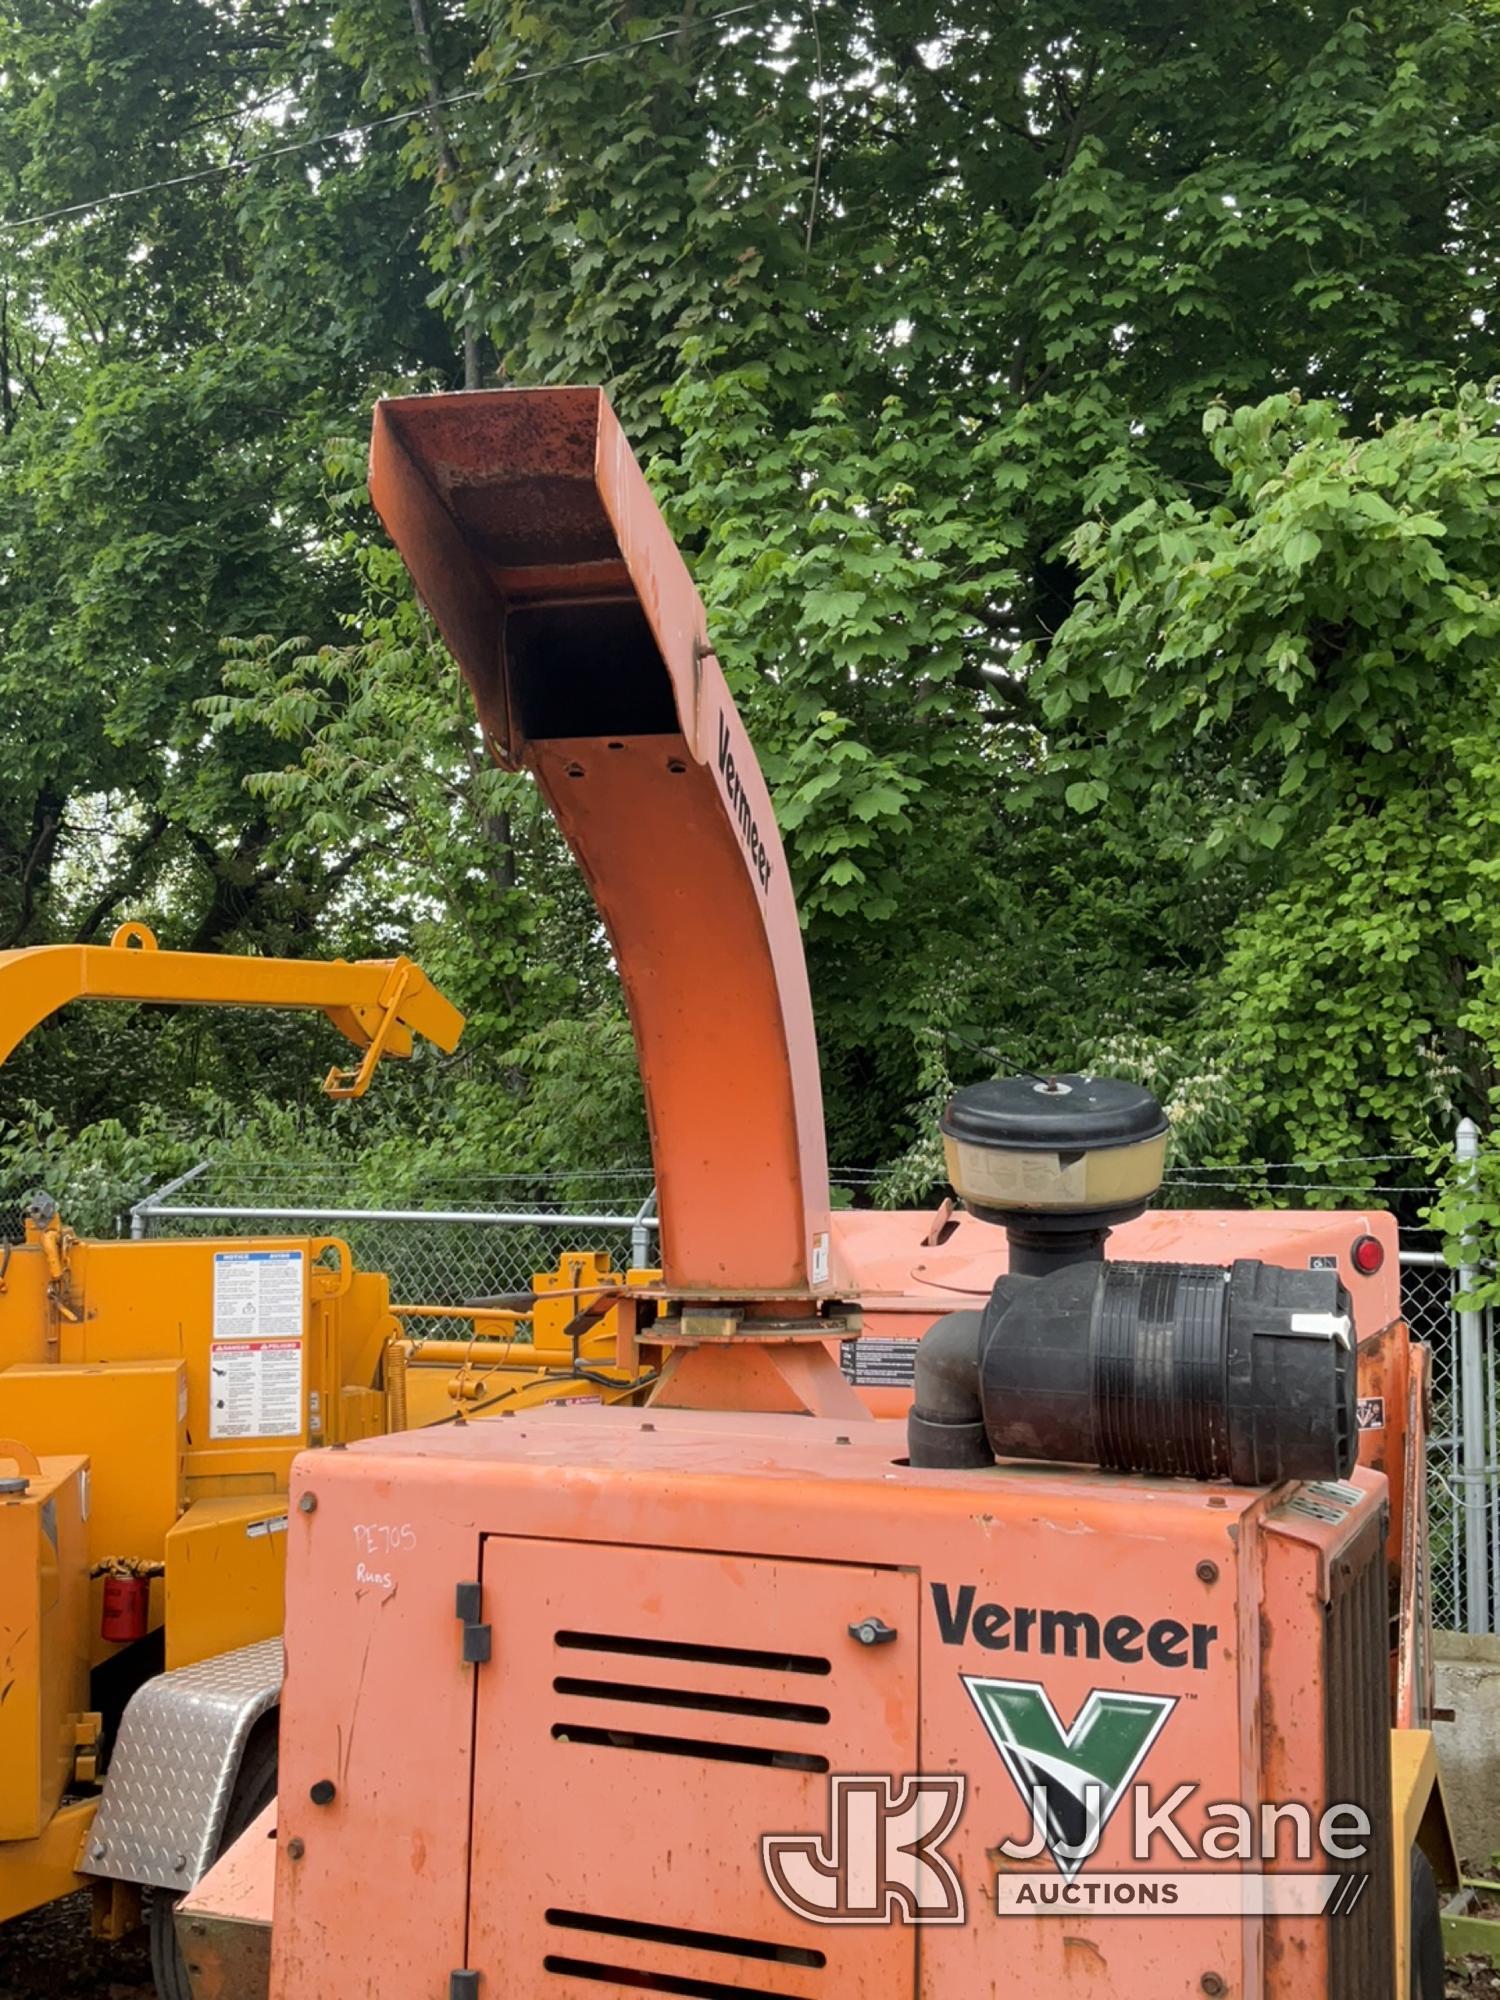 (Plymouth Meeting, PA) 2010 Vermeer BC1000XL Chipper (12in Drum) Runs, Body & Rust Damage, Seller St